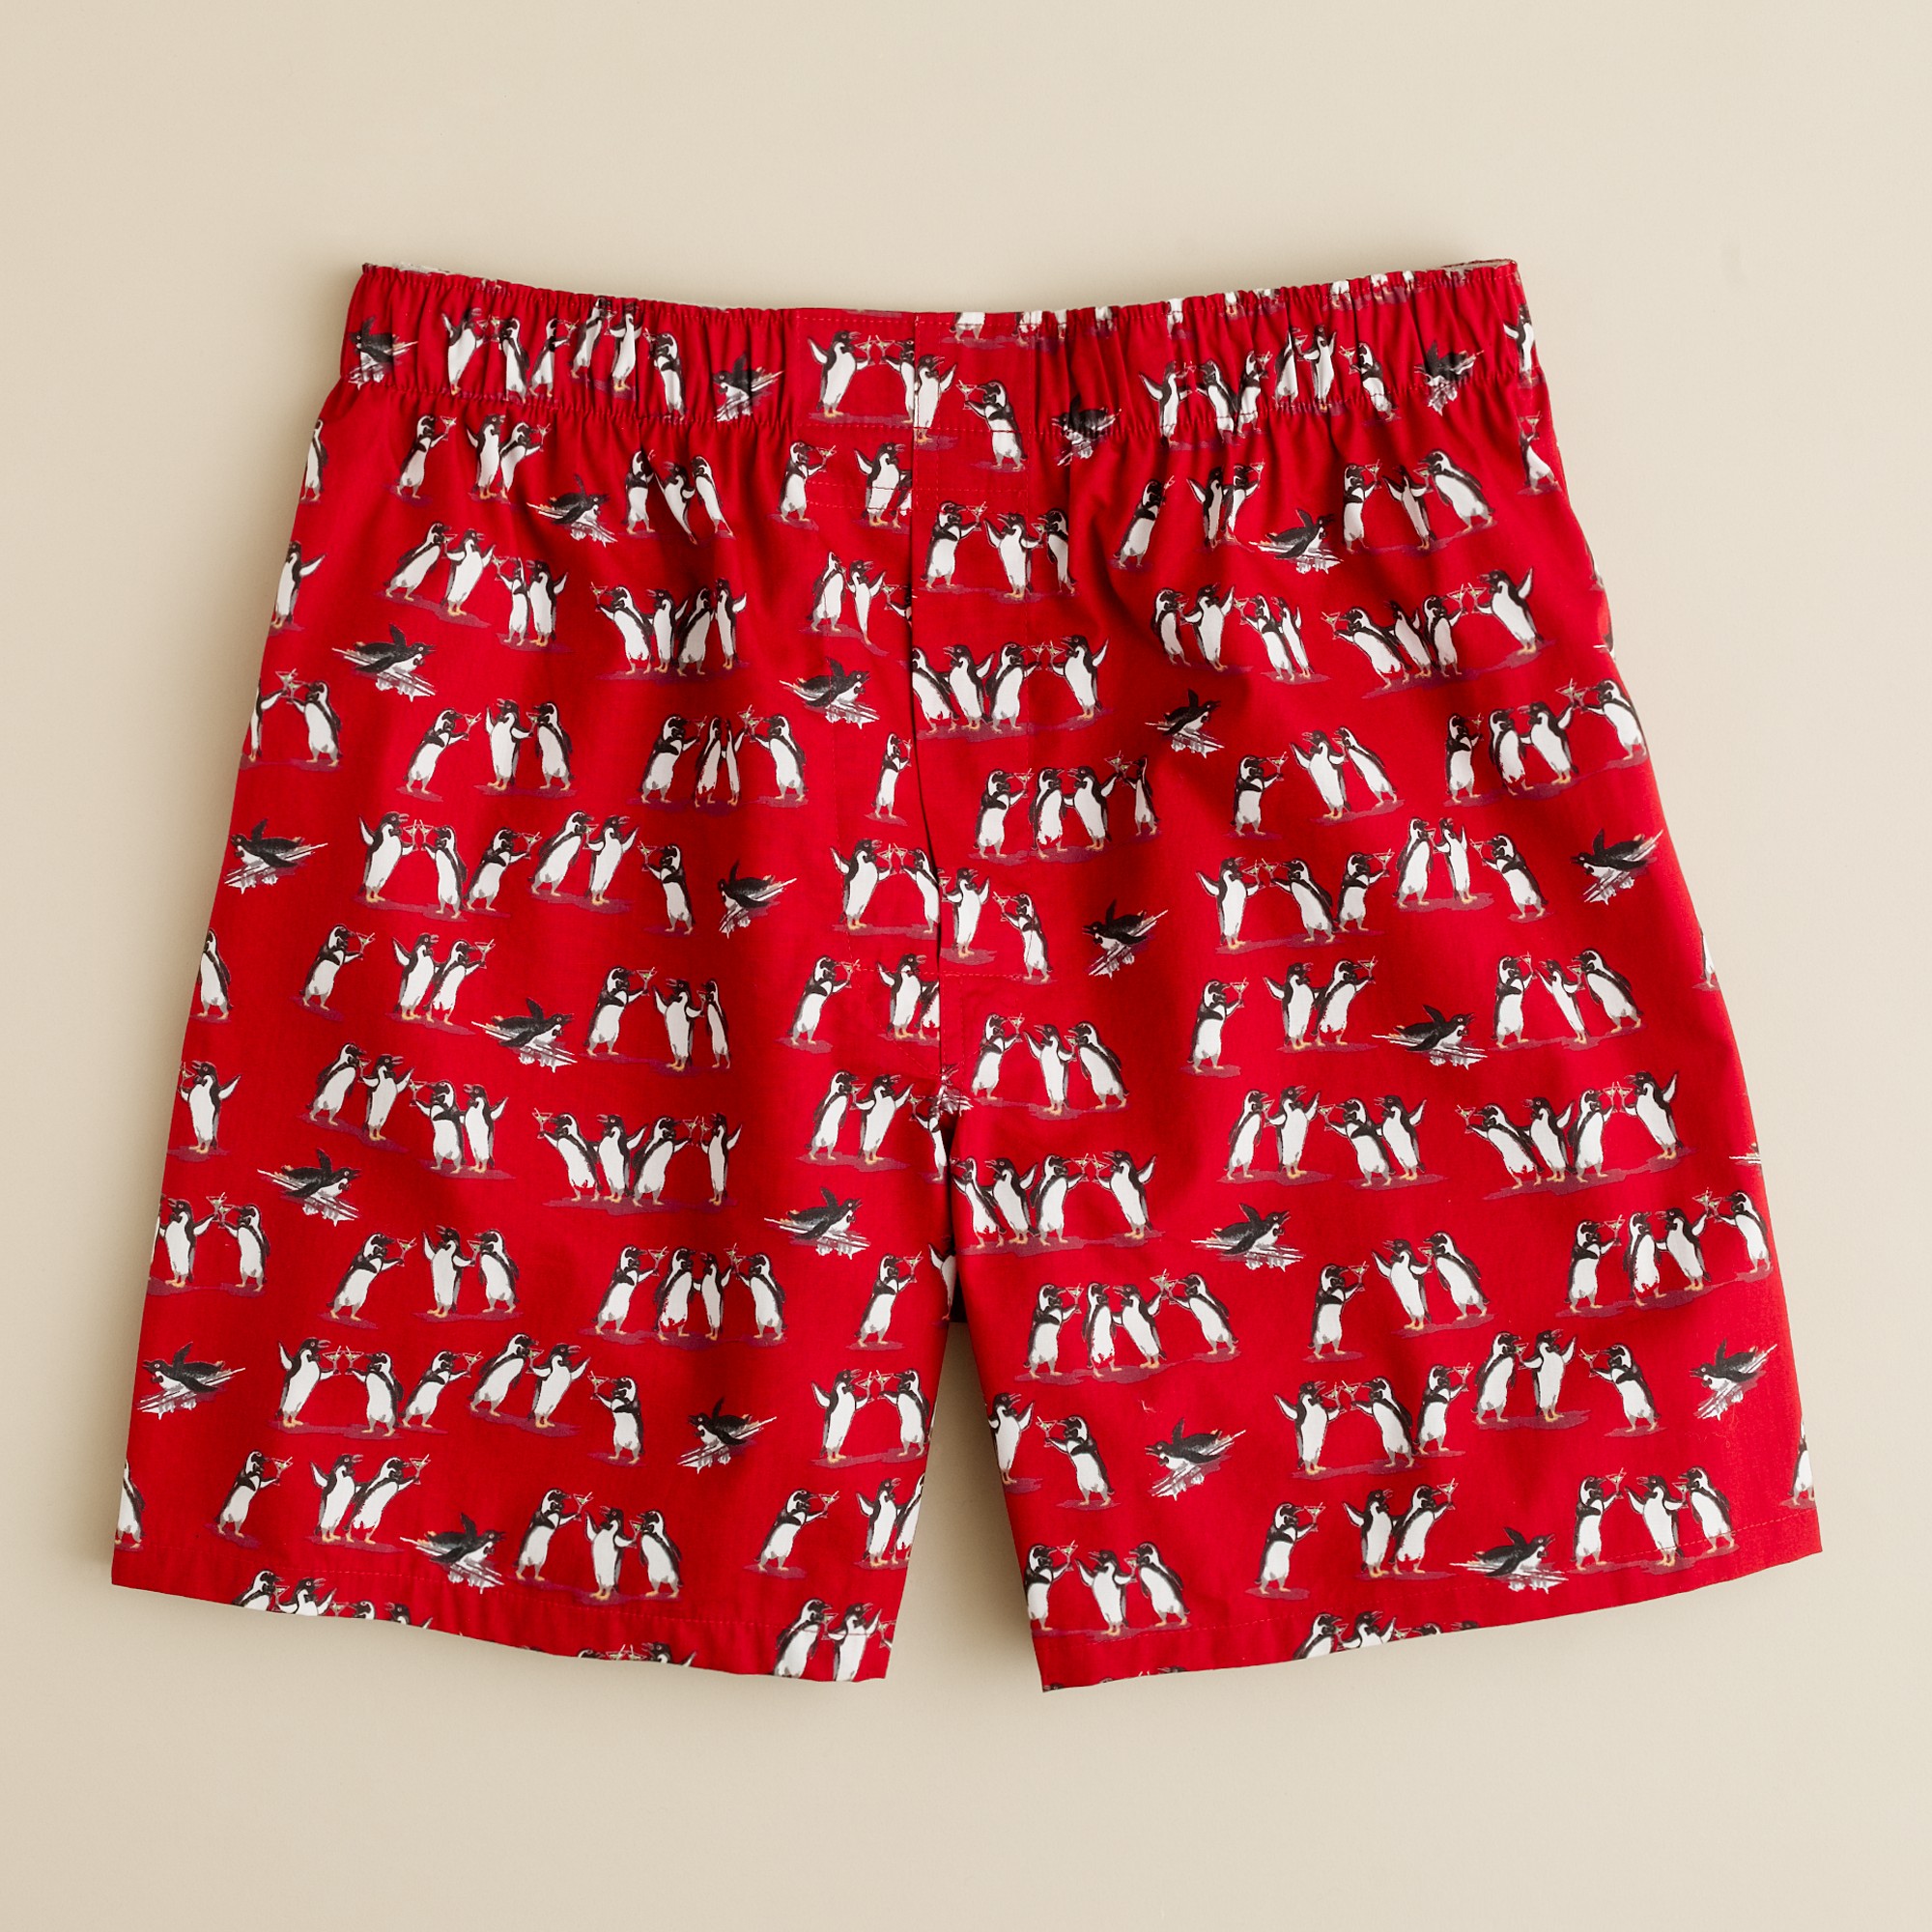 J.Crew Martini Holiday Boxers in Red for Men - Lyst